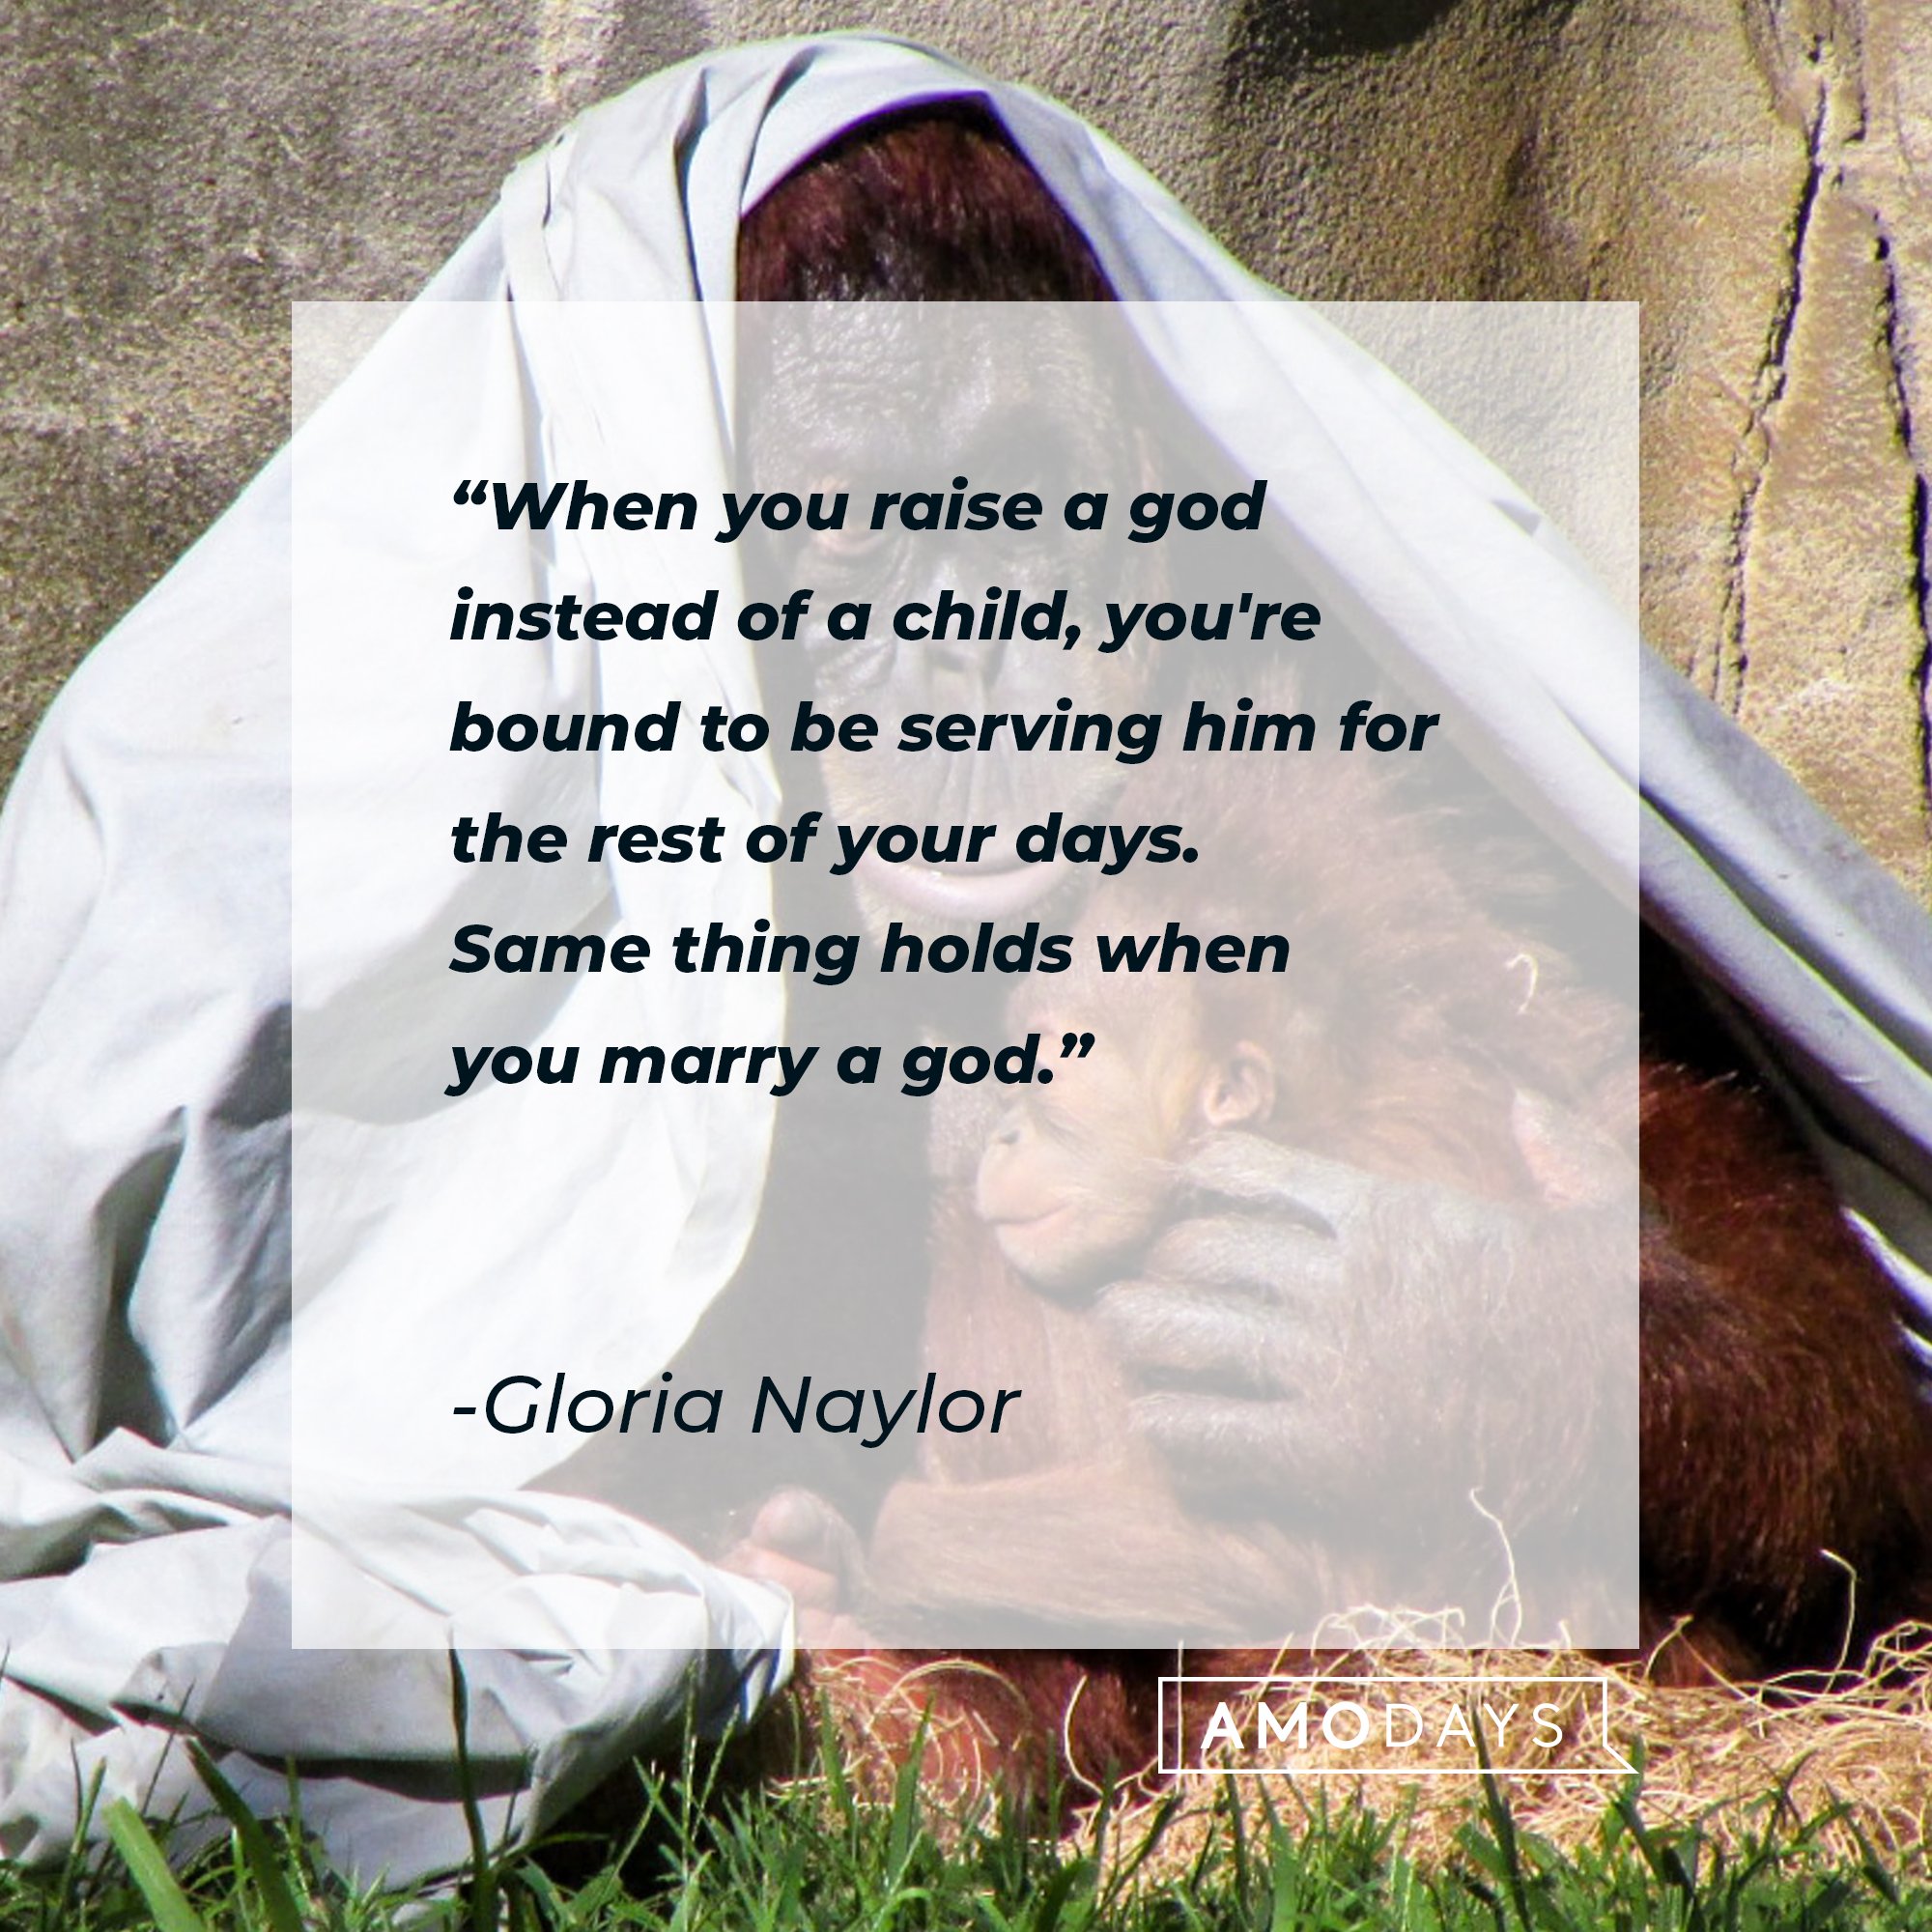 Gloria Naylor's quote: "When you raise a god instead of a child, you're bound to be serving him for the rest of your days. Same thing holds when you marry a god." | Image: AmoDays